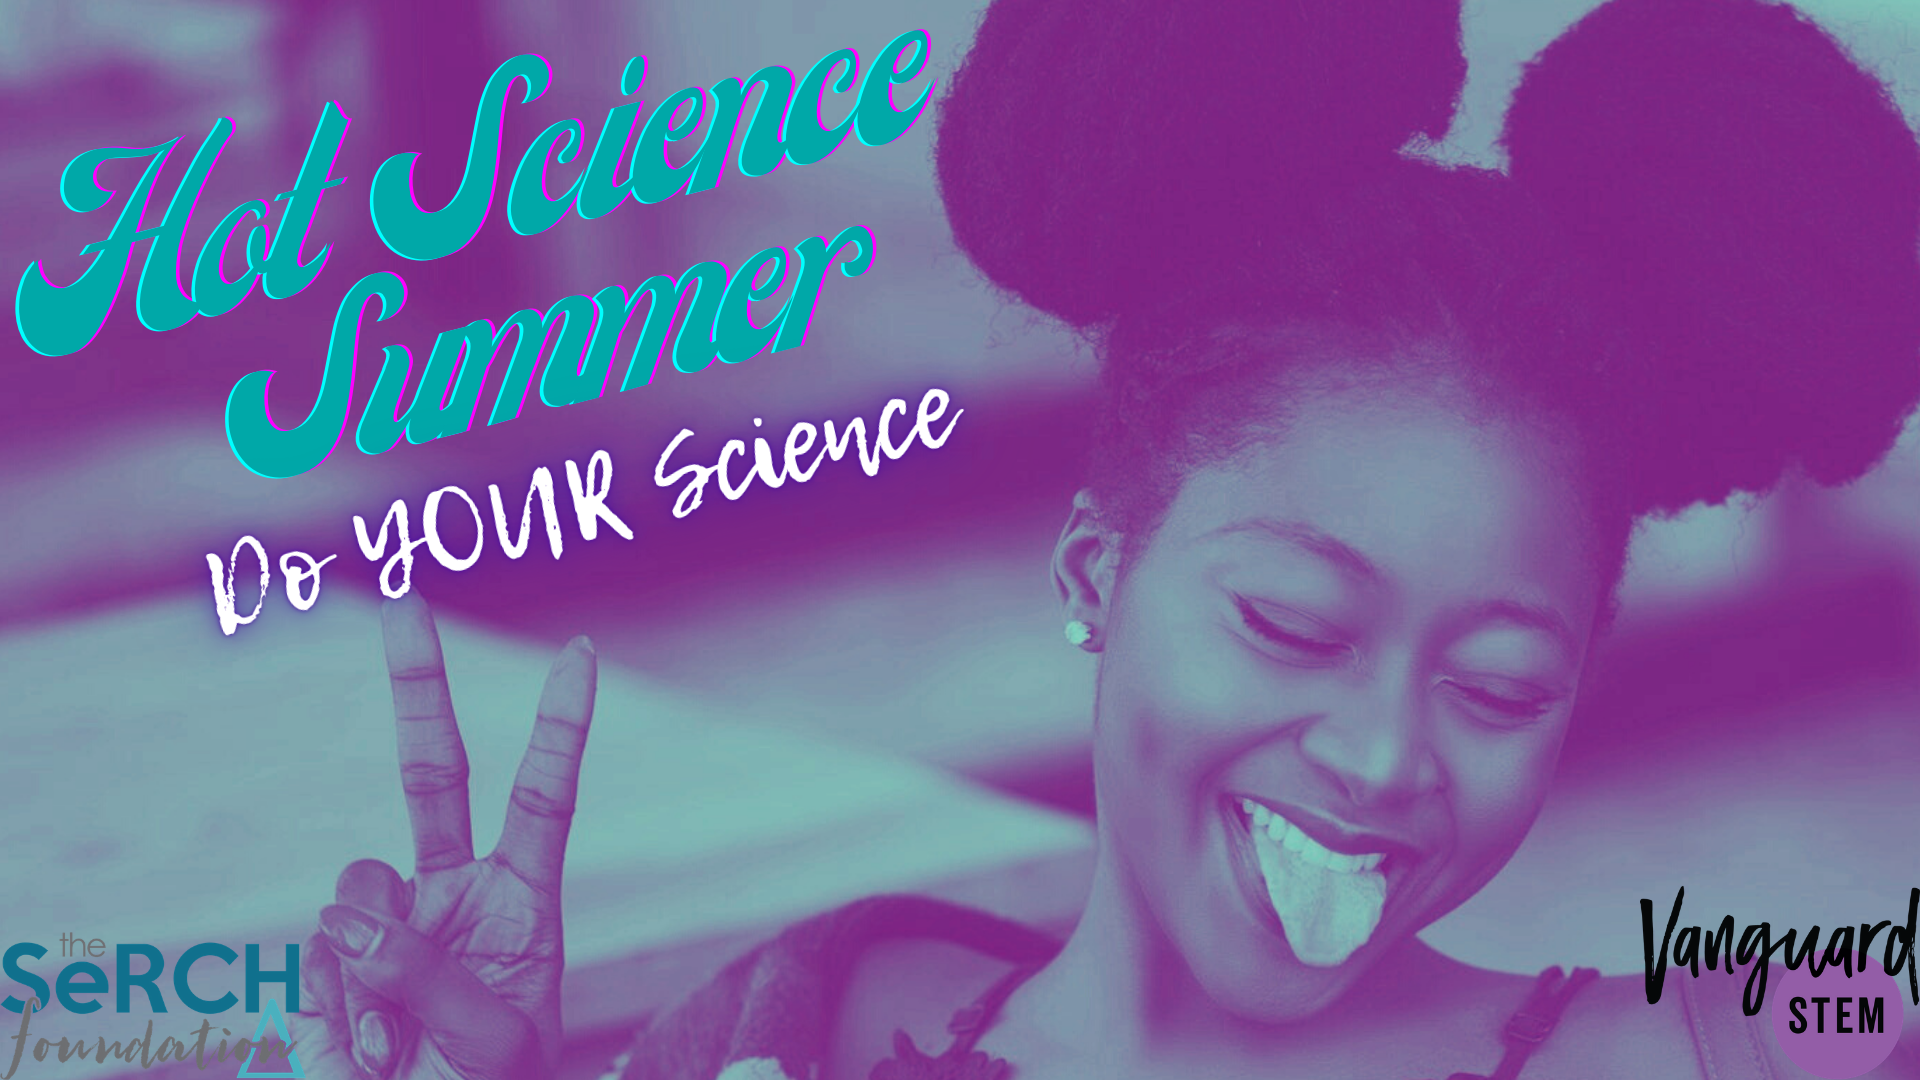 A femme-presenting person sticking their tongue out and holding up the “peace” sign, with the words “Hot Science Summer. Do YOUR science” written stylistically. Also contains the logos for VanguardSTEM and the SeRCH Foundation, Inc.